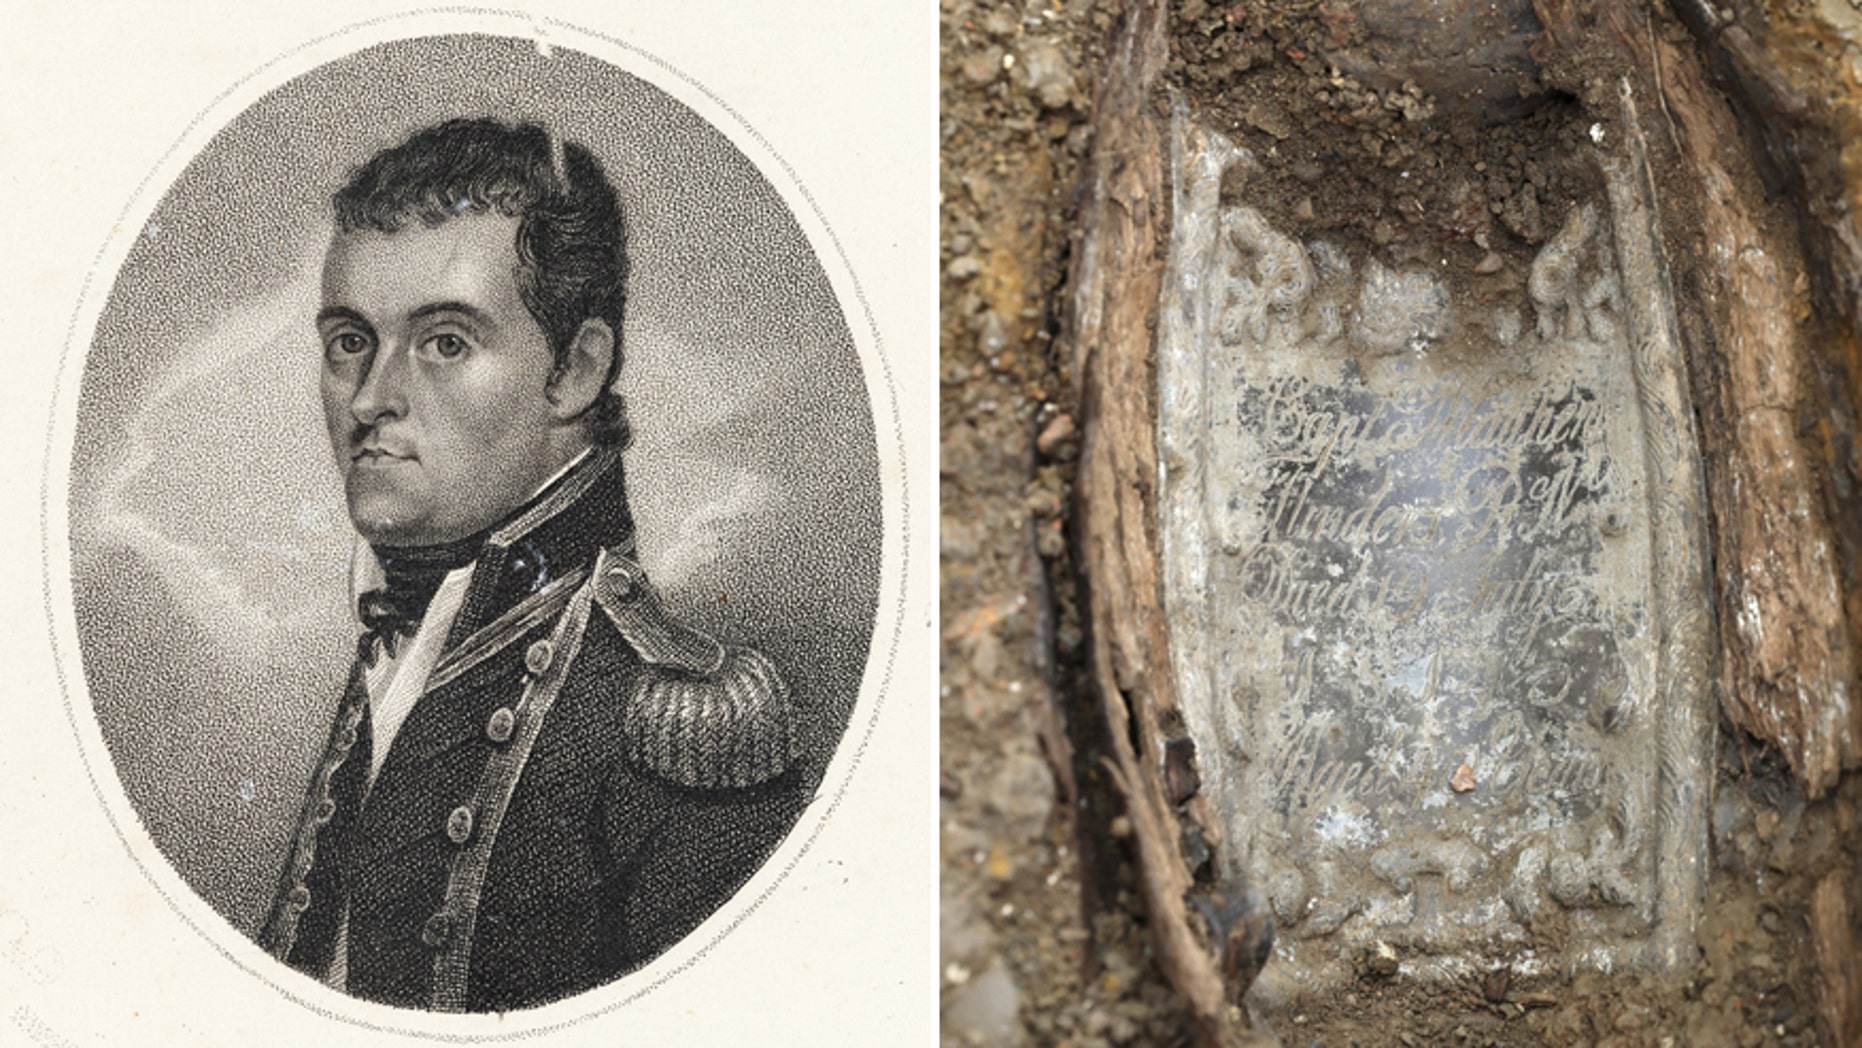 Lost remains of explorer credited with naming Australia discovered near London railway station